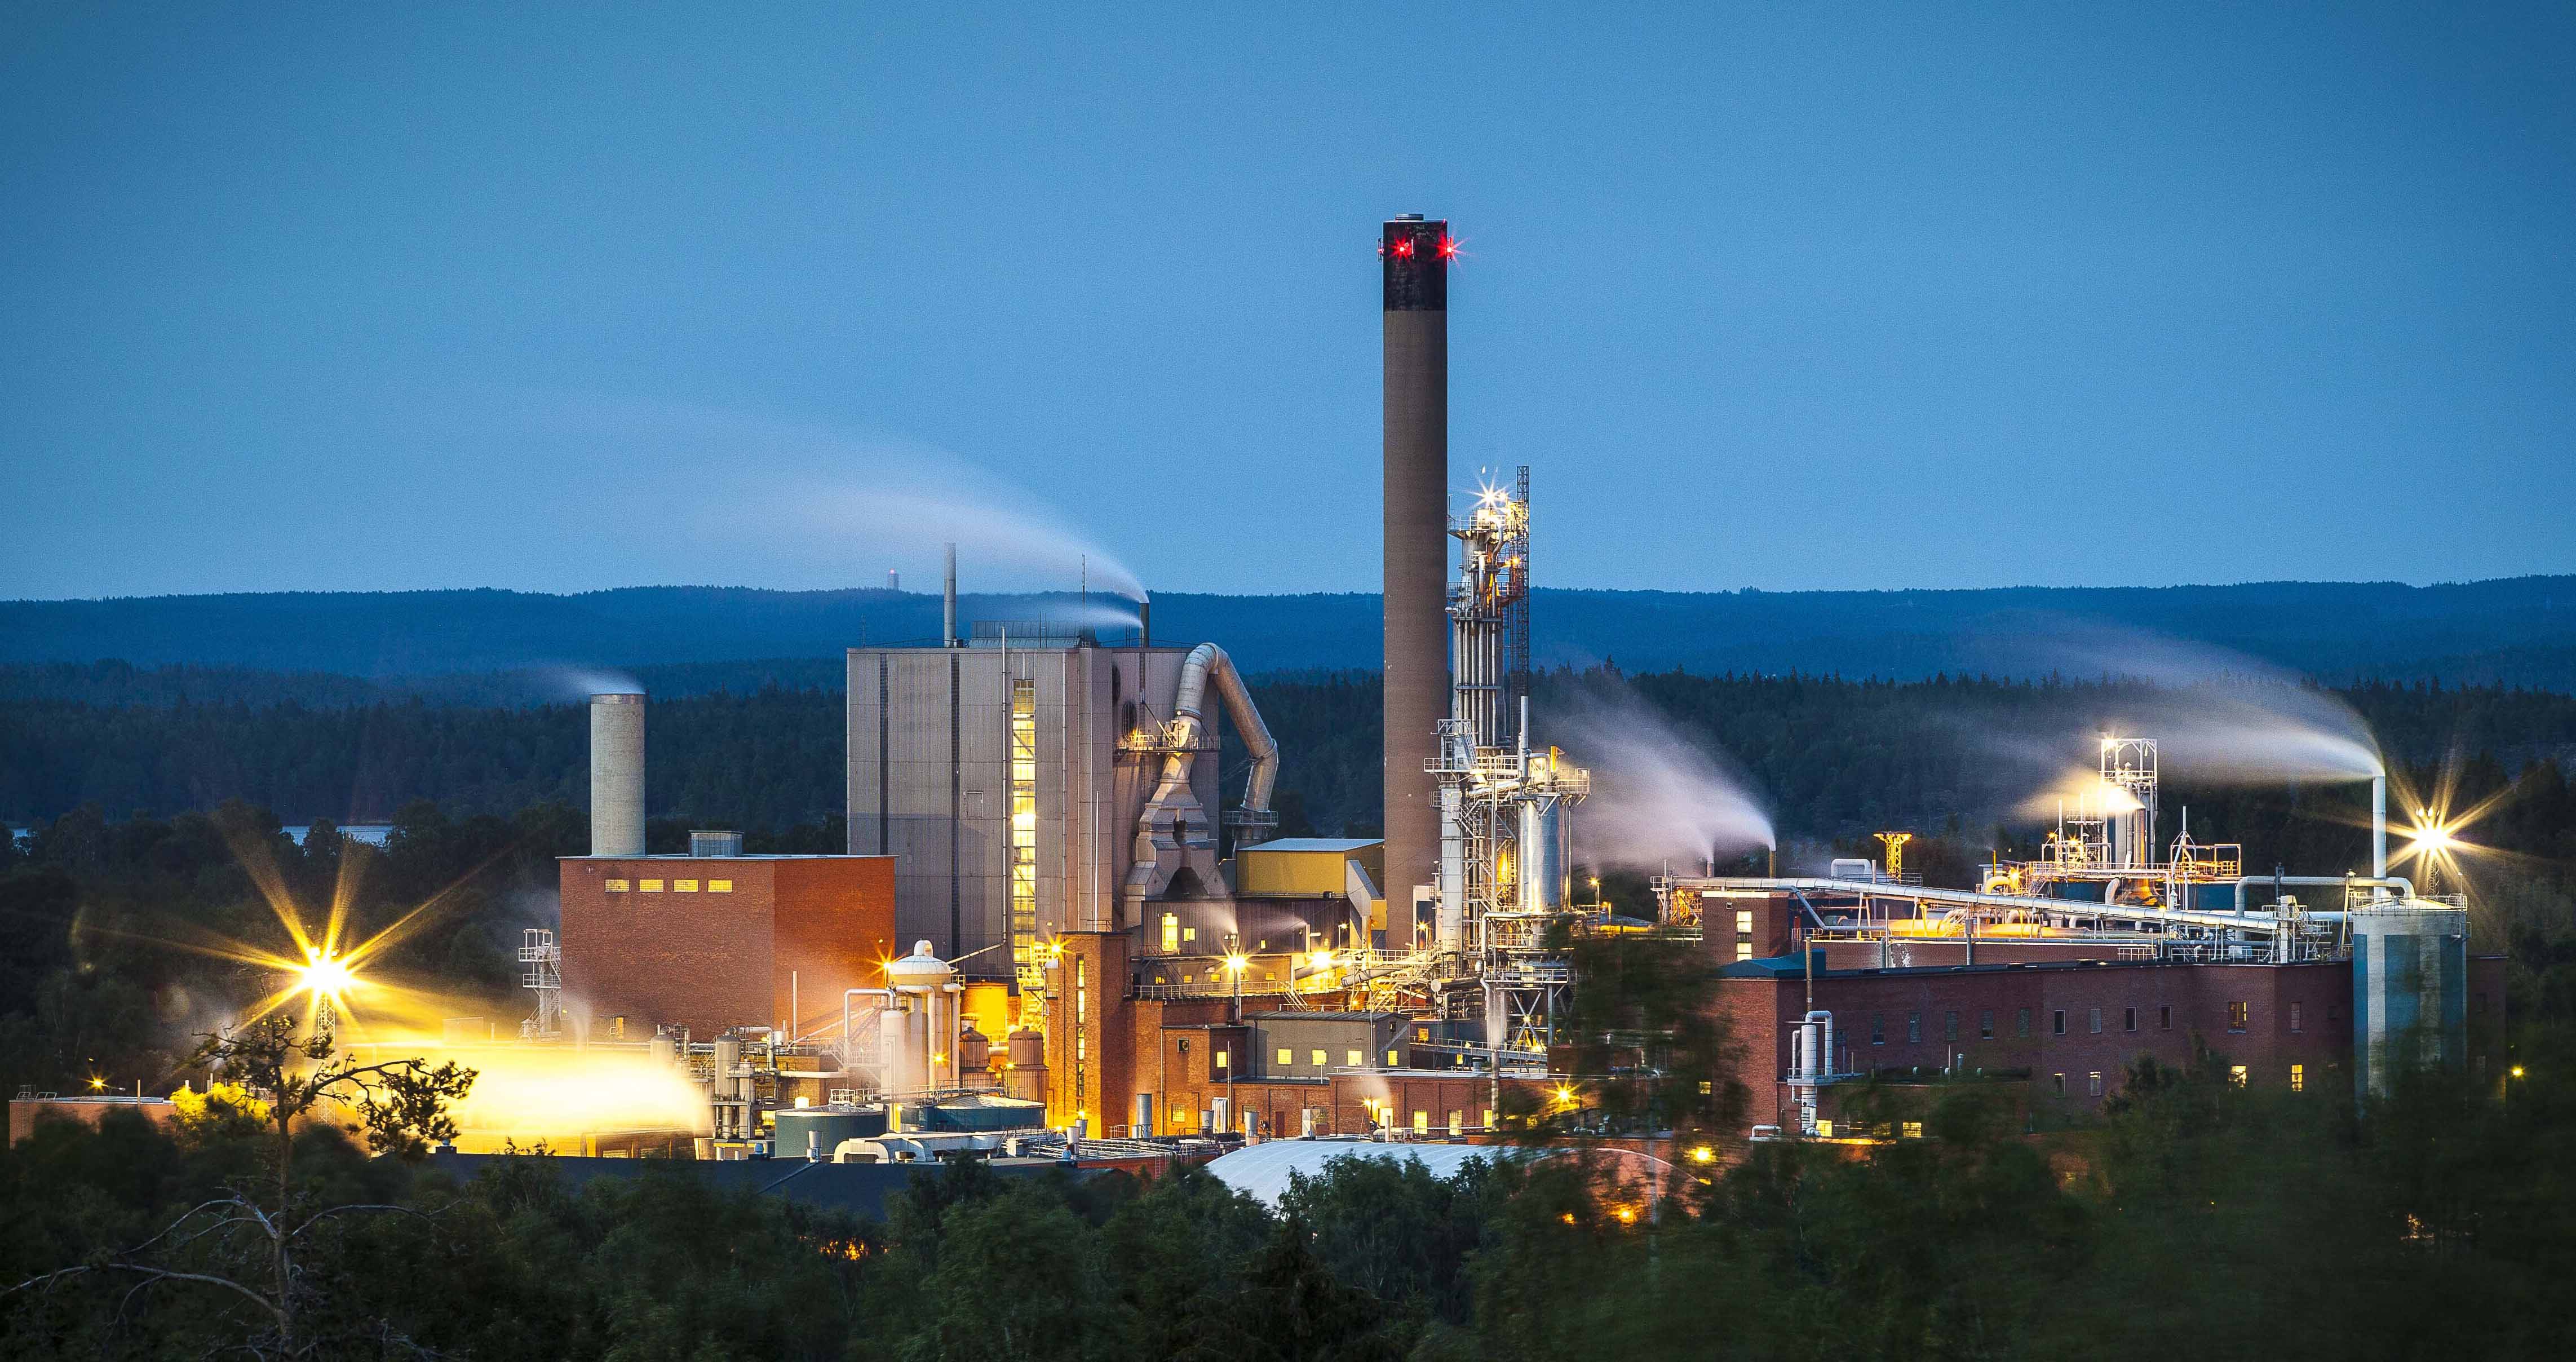 View of pulp mill at dusk 